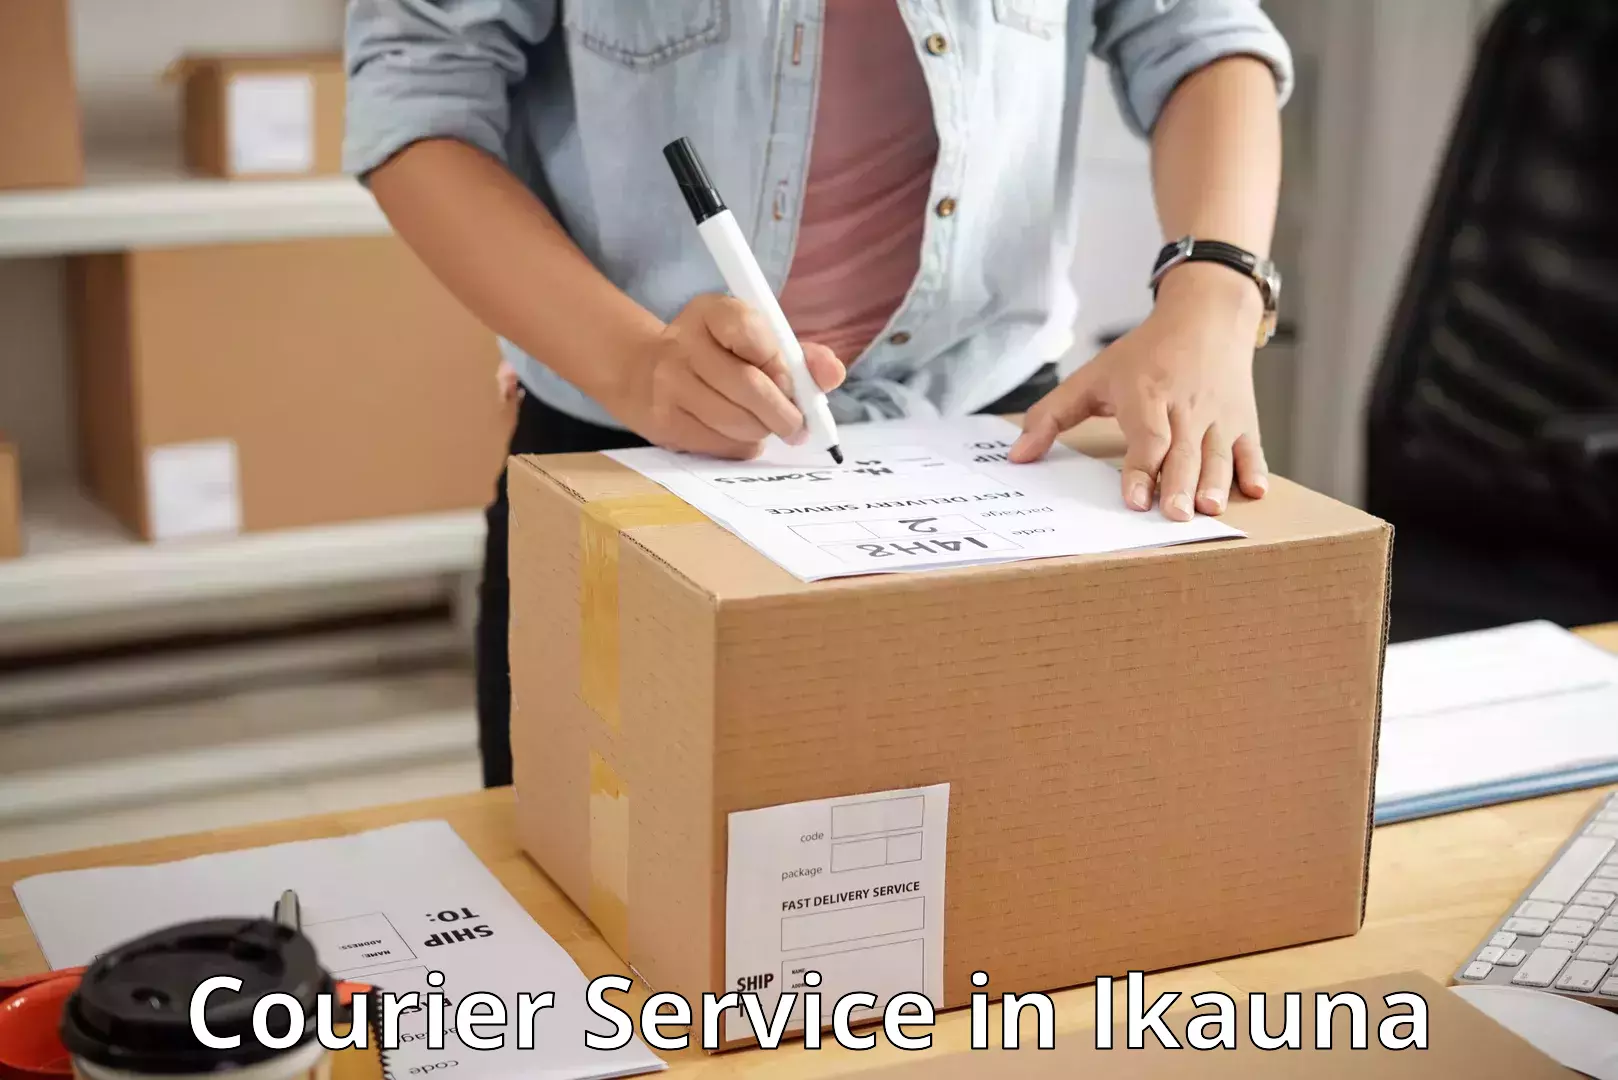 Streamlined delivery processes in Ikauna